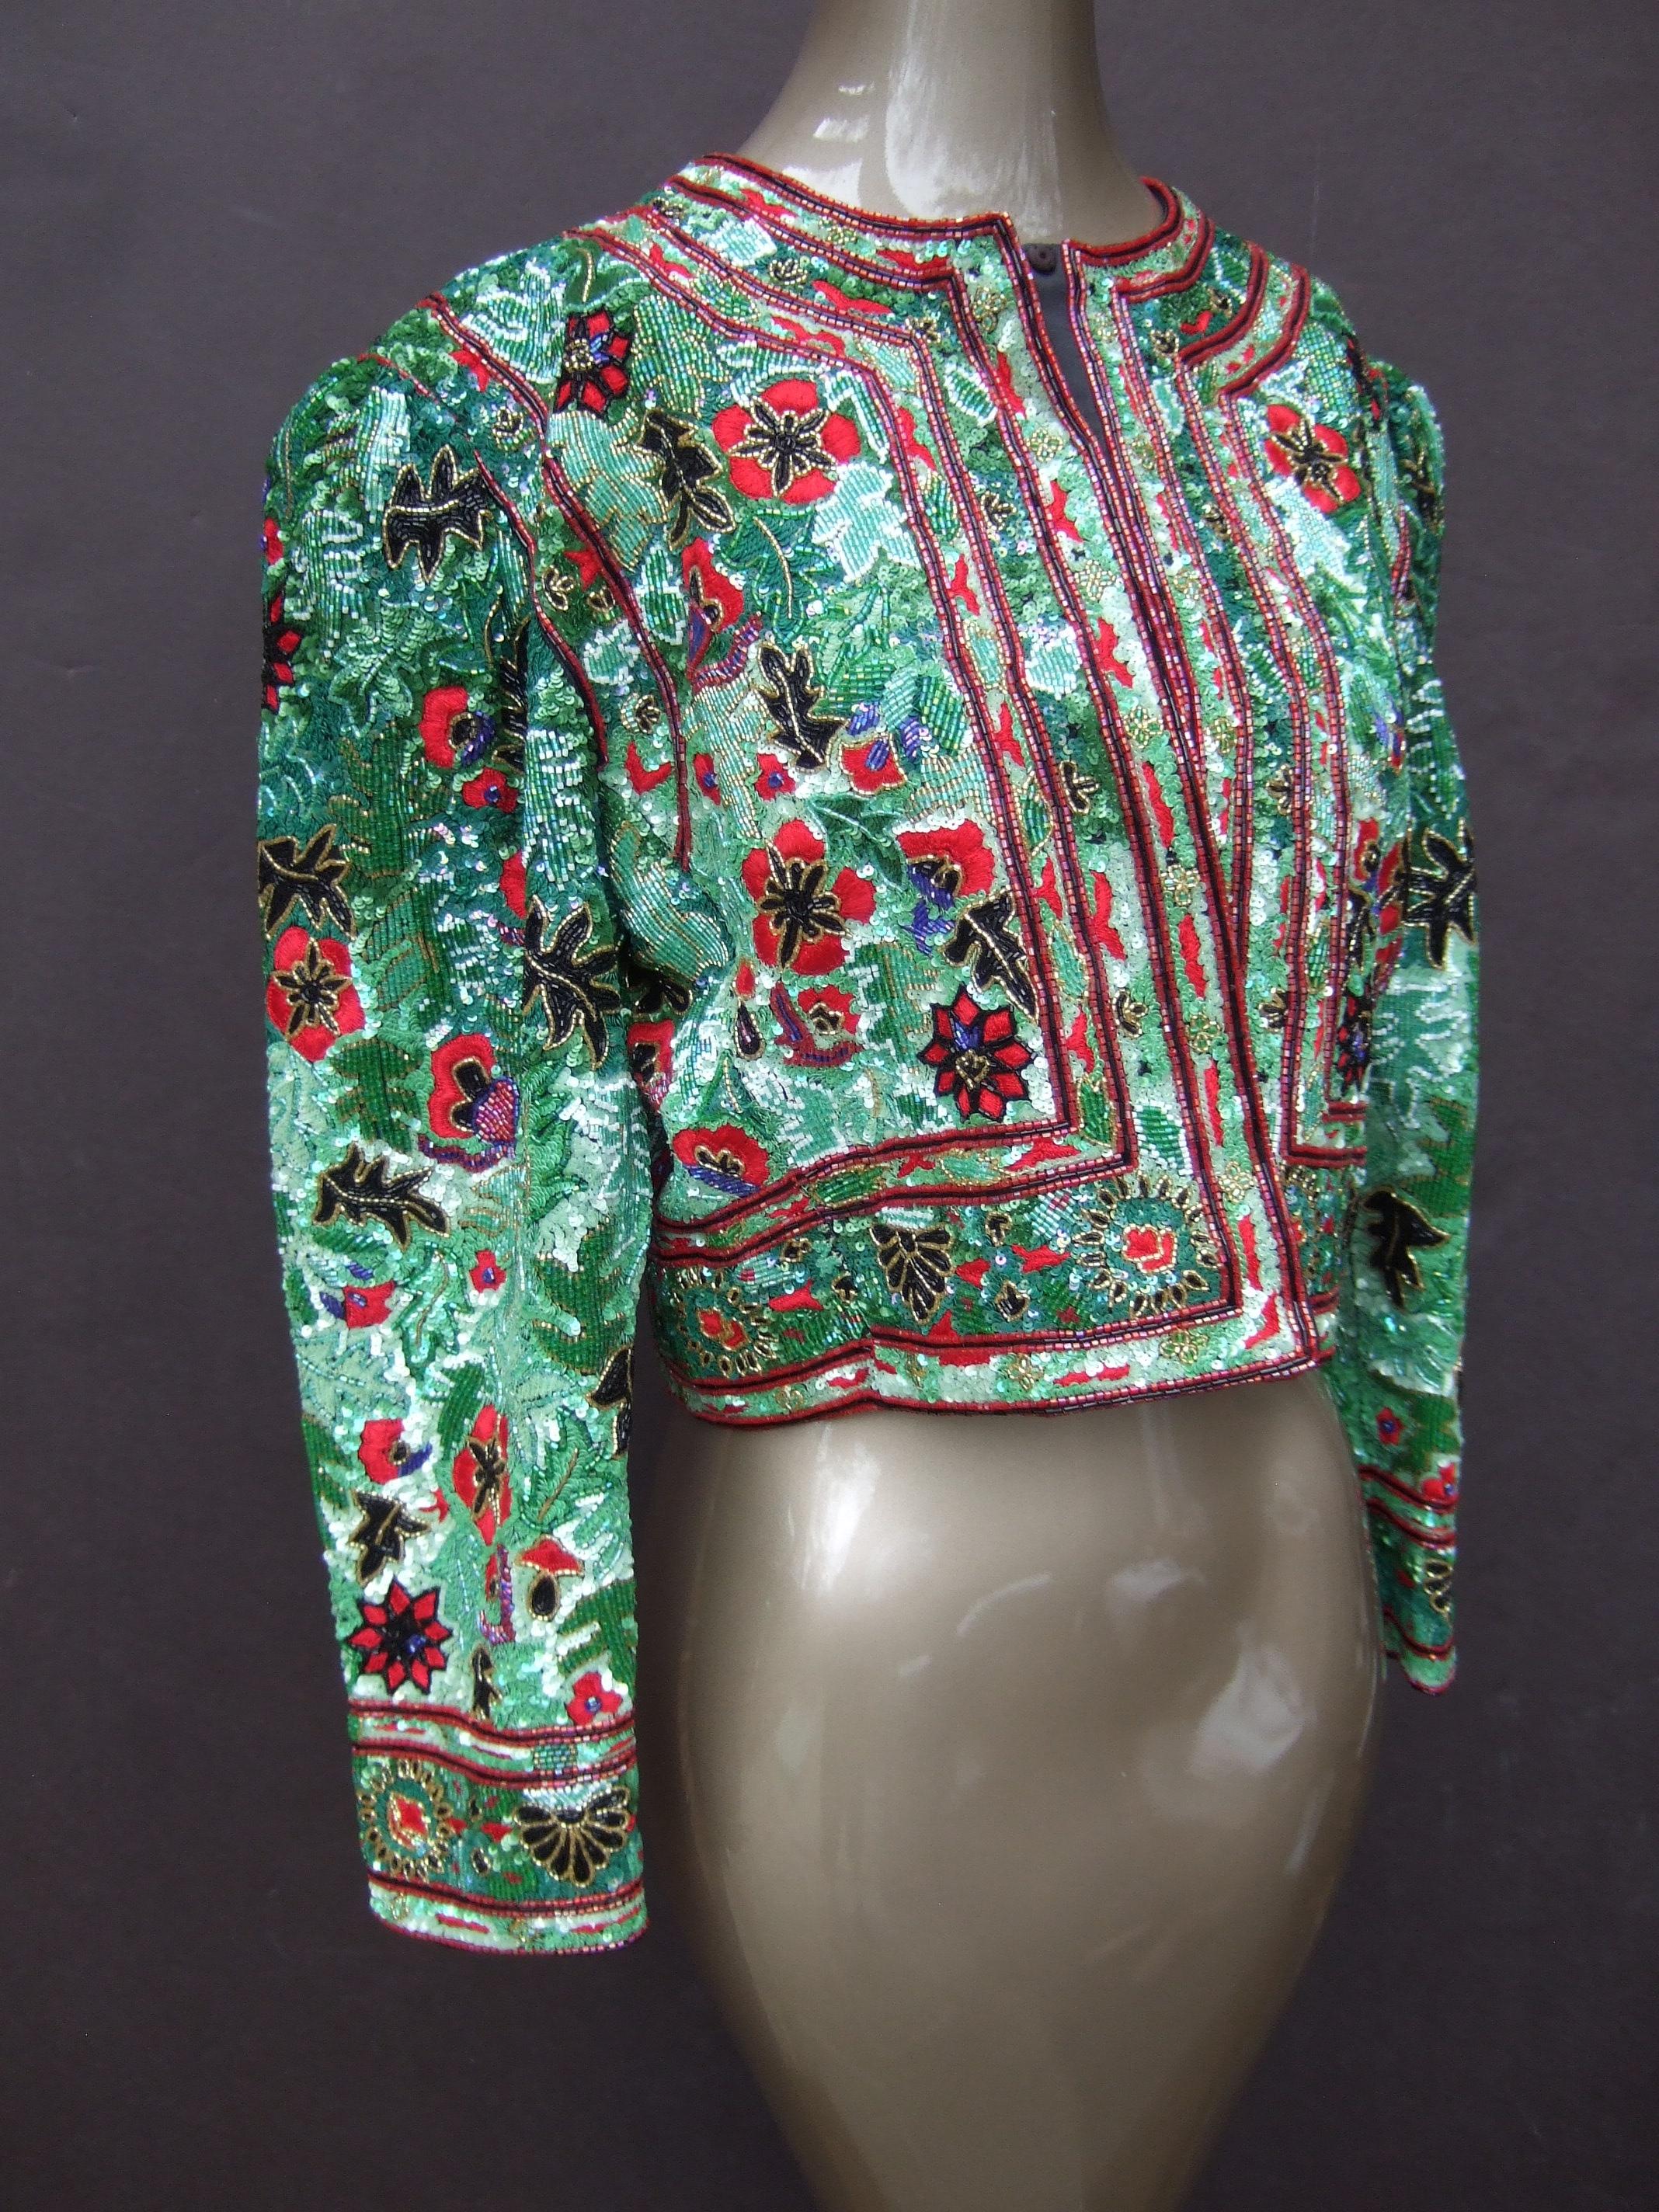 Exquisite Elaborate Glass Floral Beaded Embroidered Bolero Jacket c 1980s For Sale 6